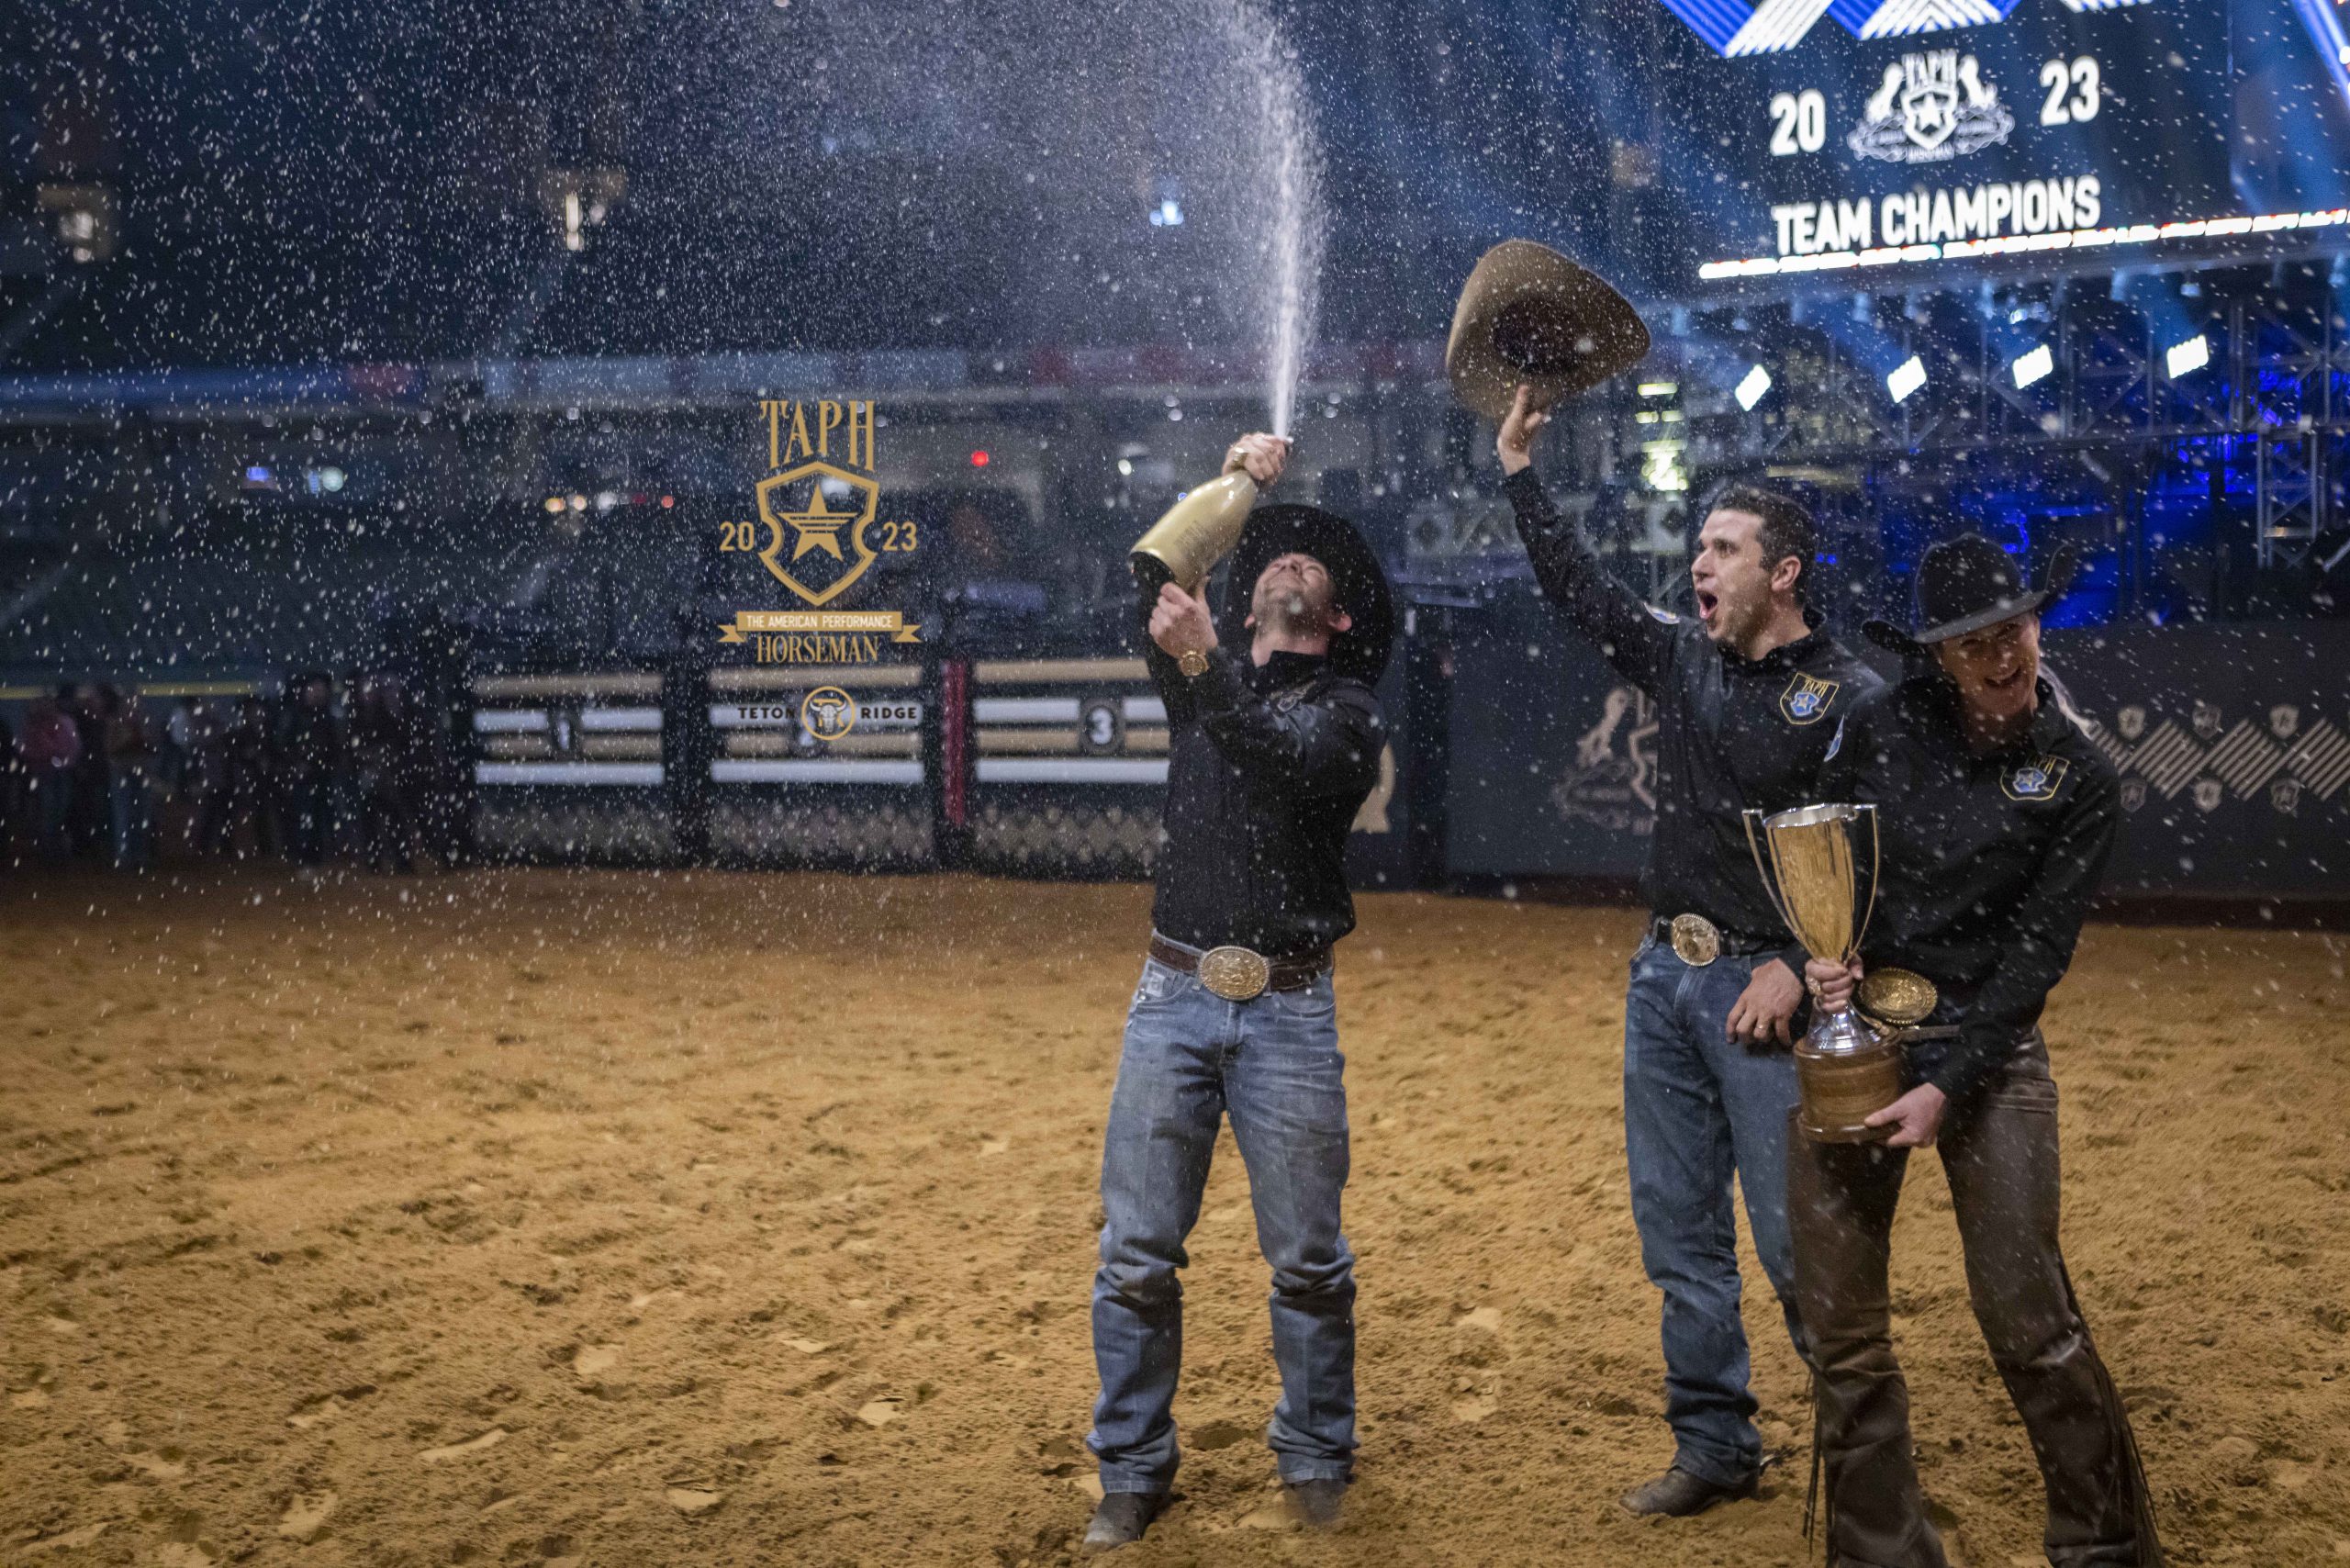 Adan Banuelos (left) sprays champaign in celebration with Fernando Salgado (middle), who holds his hat up in celebration, and Sarah Dawson (right), who holds the American Performance Horseman trophy.